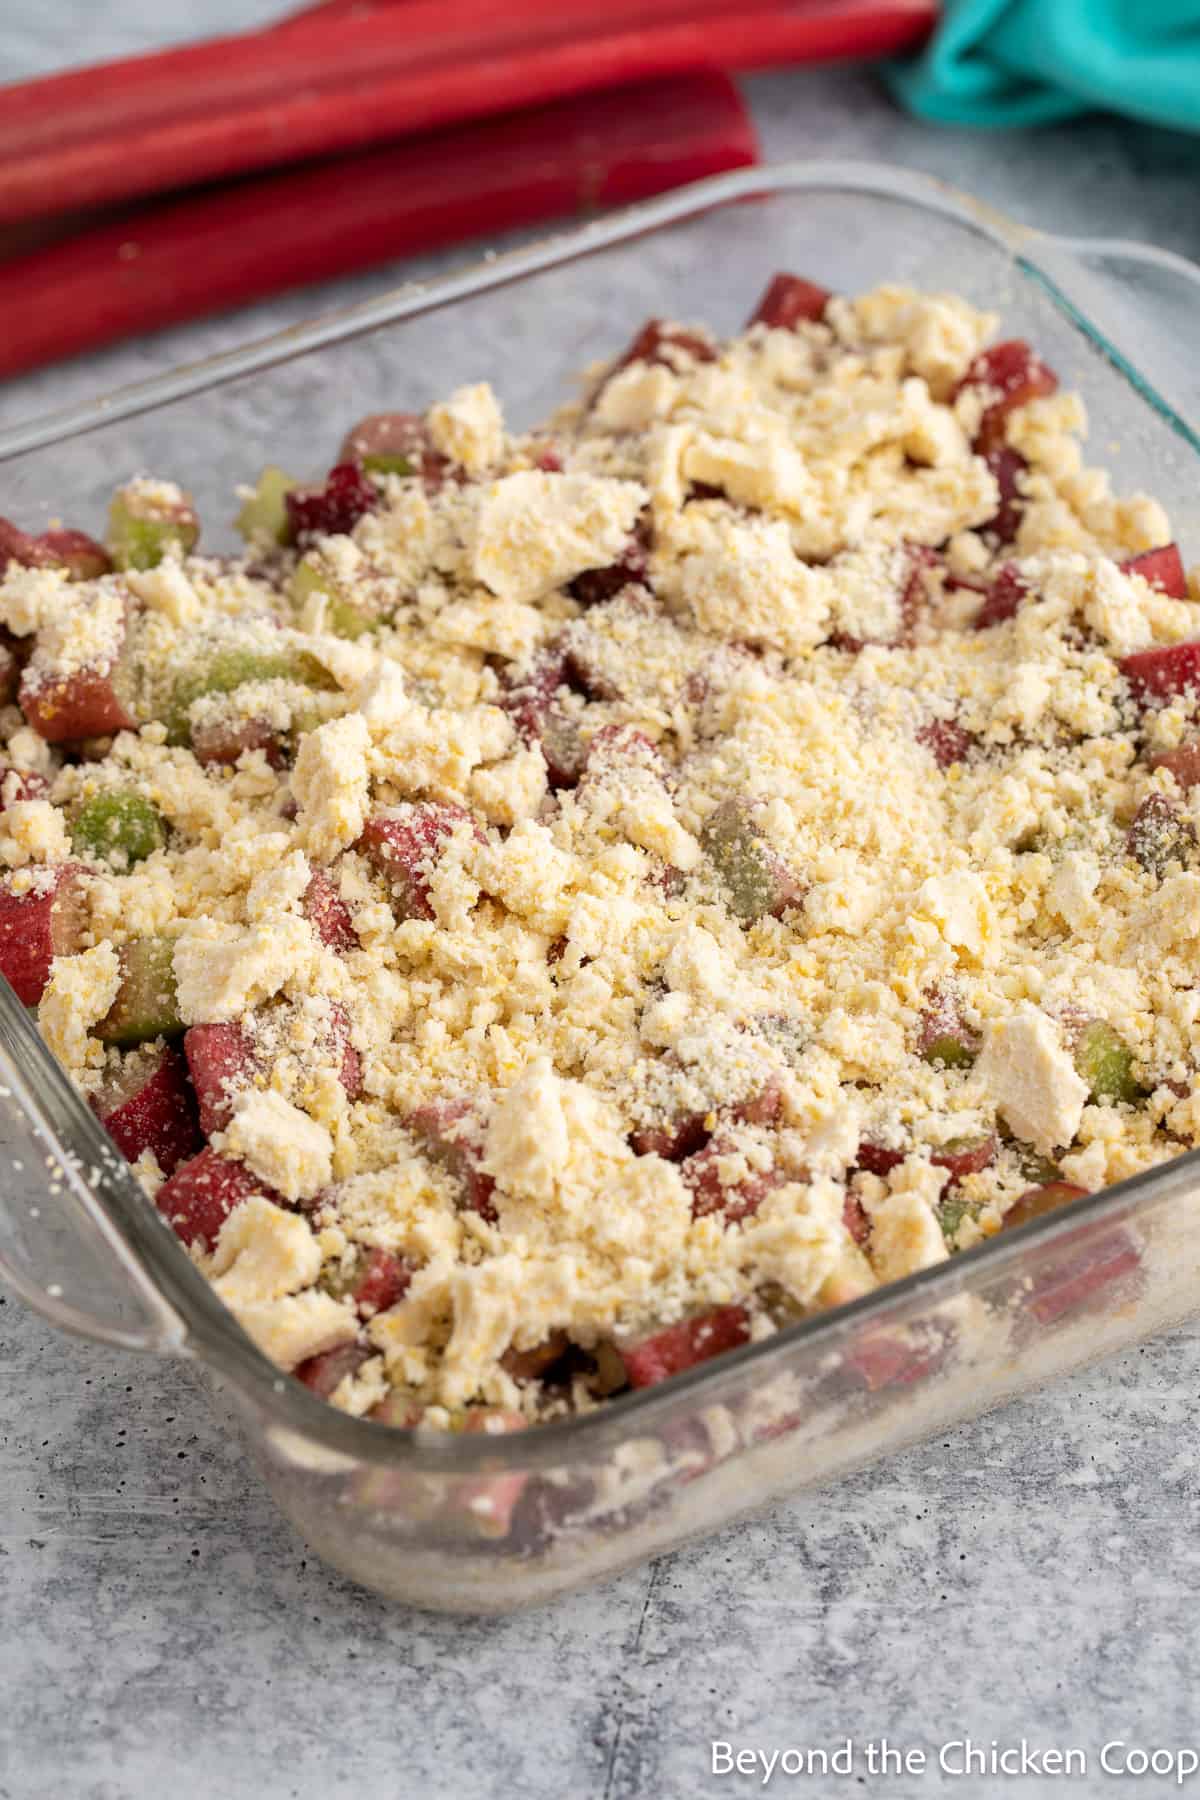 An unbaked rhubarb dessert in a baking dish. 